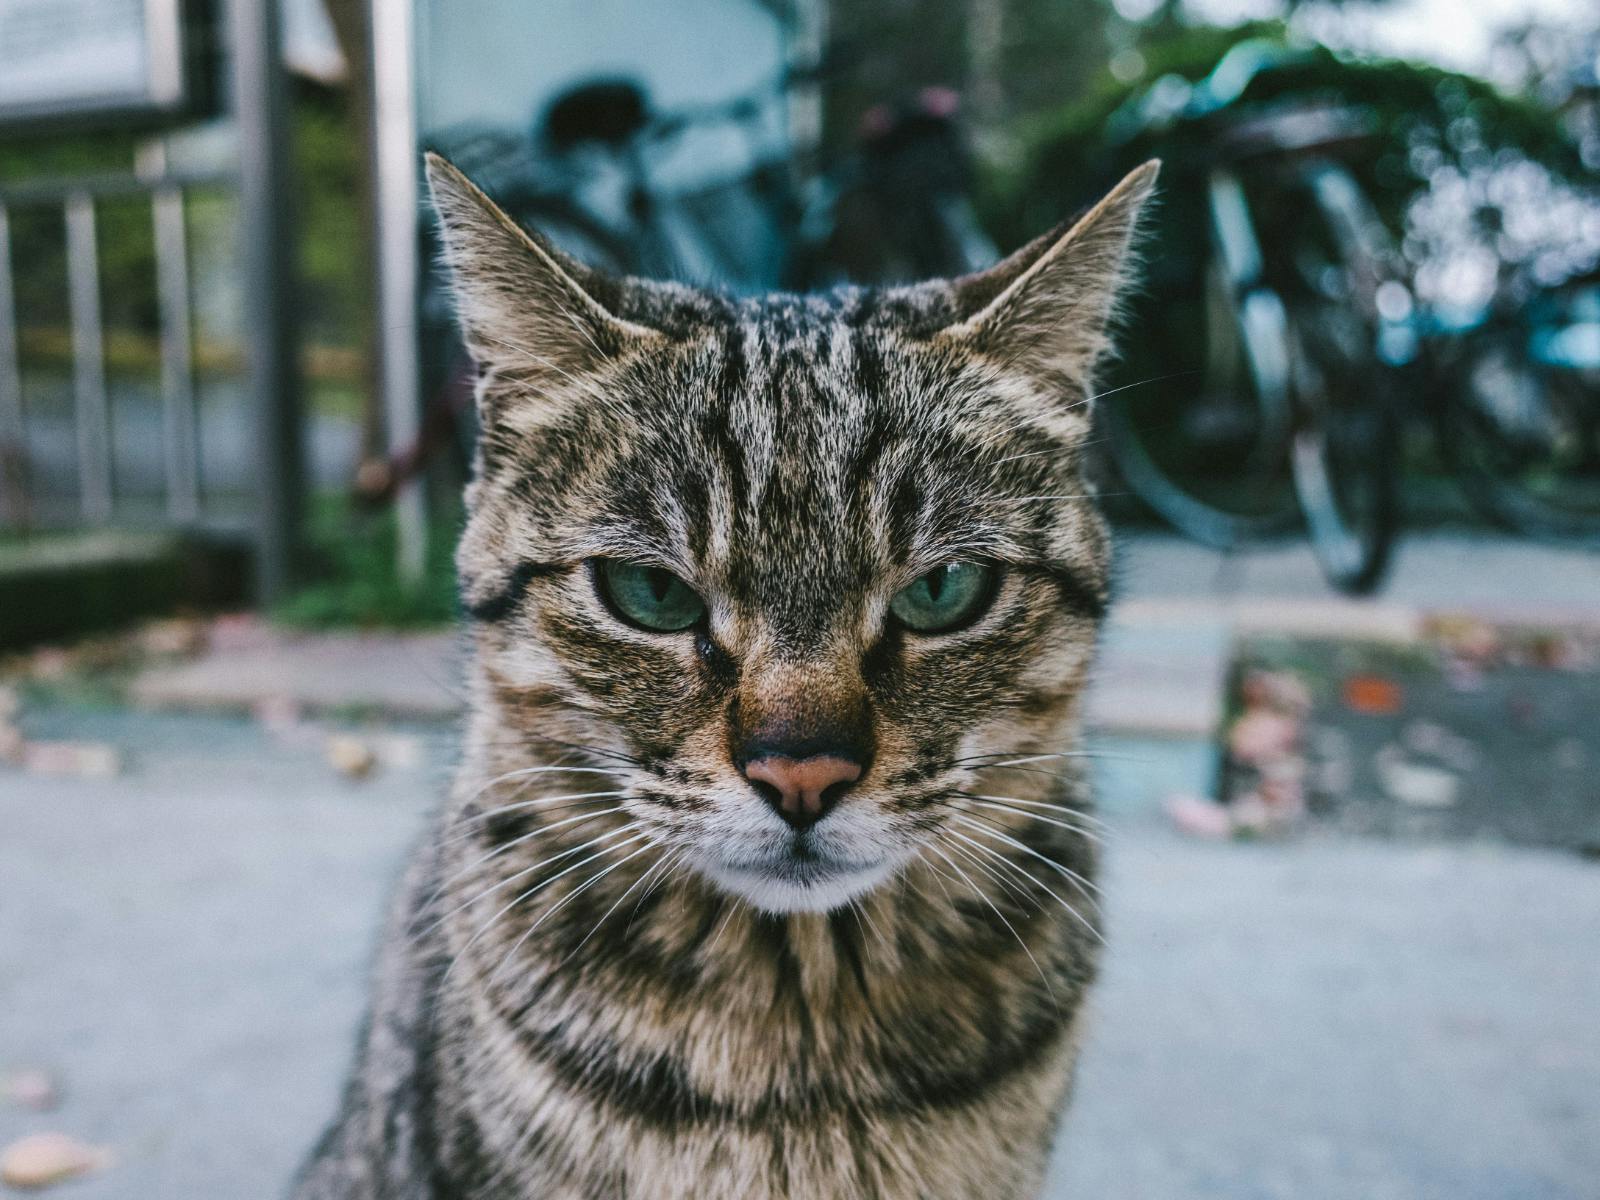 The face of a tabby cat with green eyes and a pink nose. Similar to the stray I saw gallop towards a man who was going to feed her.